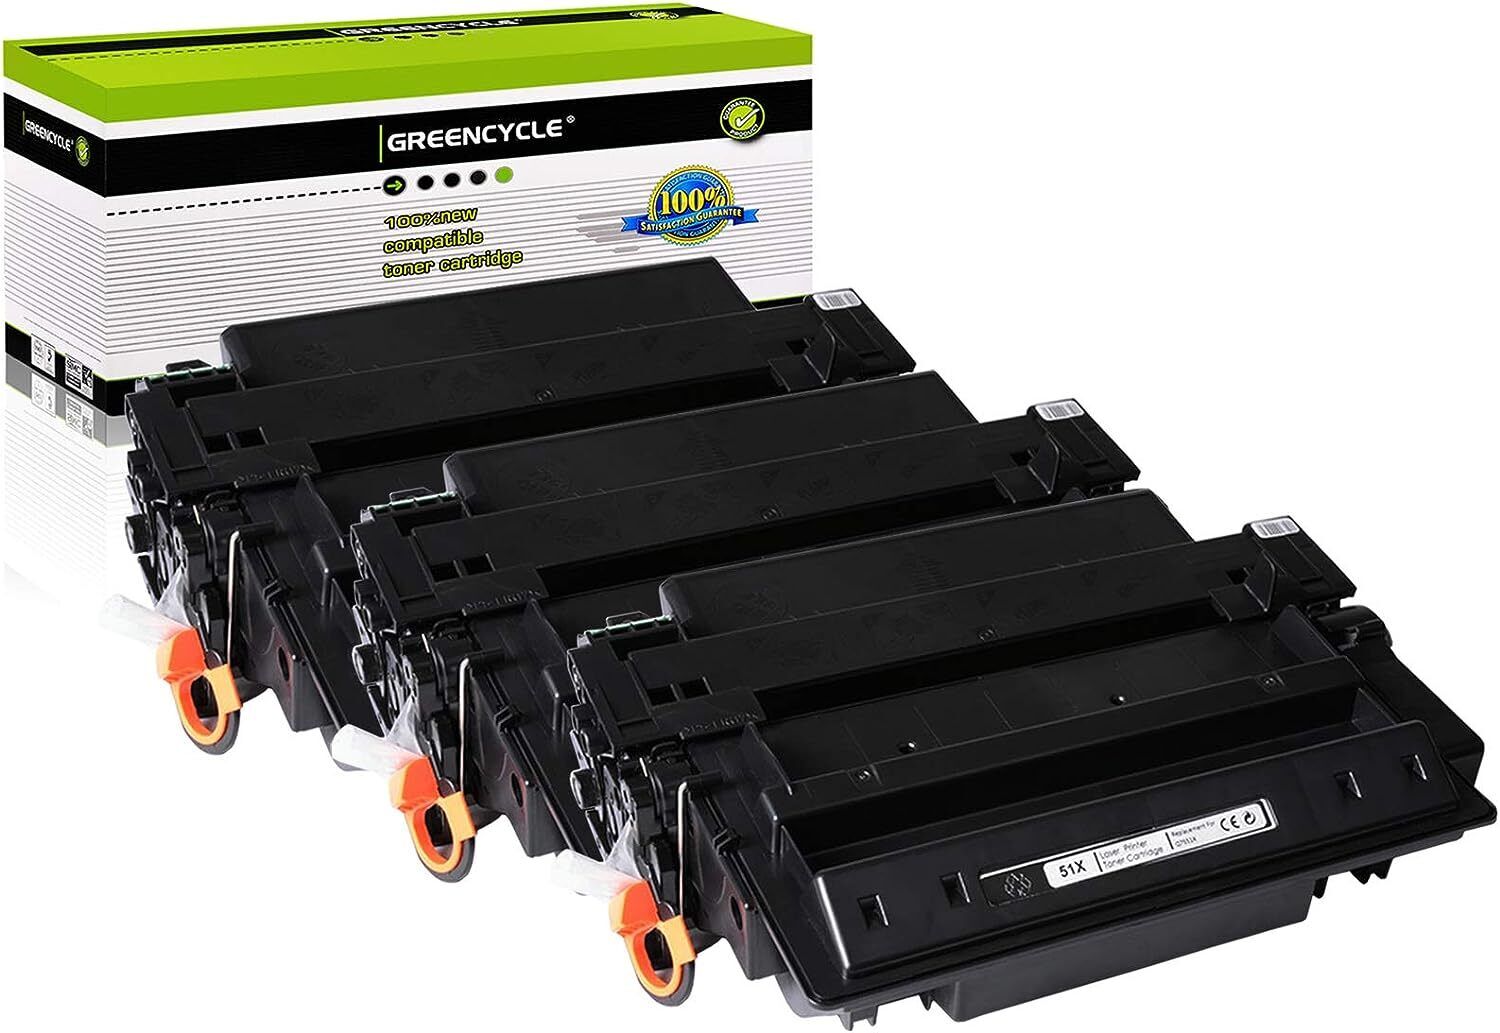 3PK Greencycle 51X Q7551X Toner Compatible for HP Laserjet M3027/3035/3035XS MFP